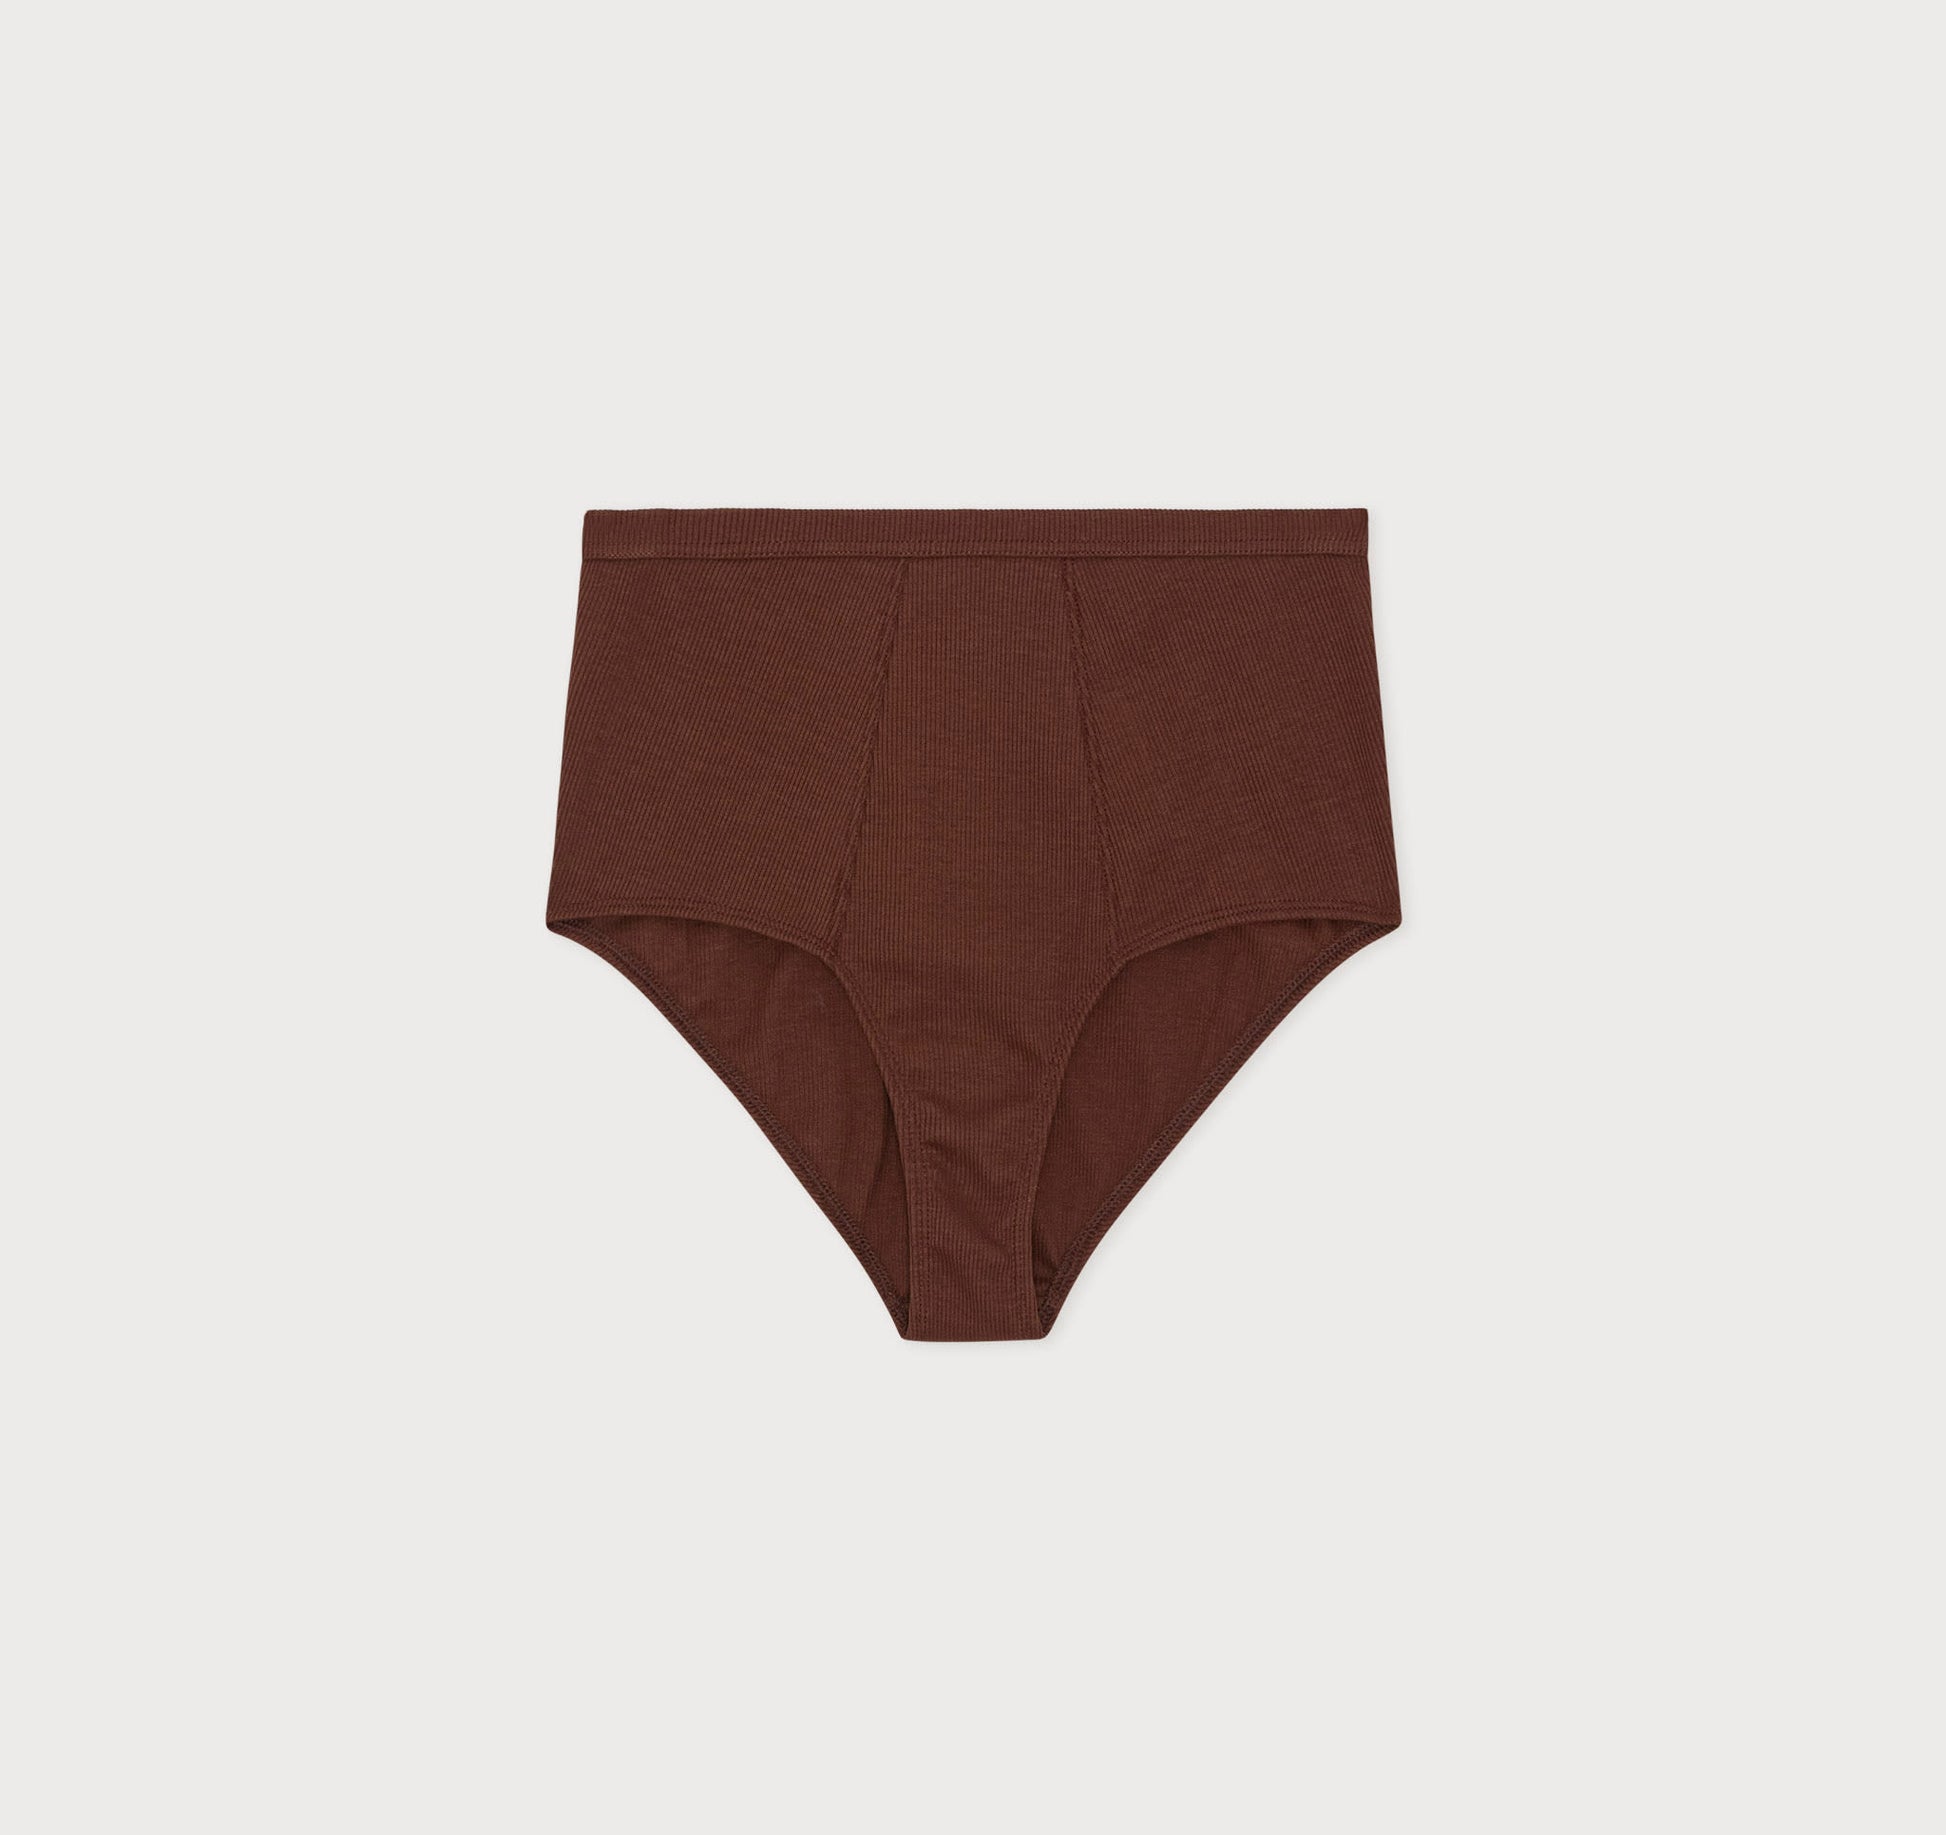 Ribbed modal & cotton brief [Mangrove] – The Pantry Underwear